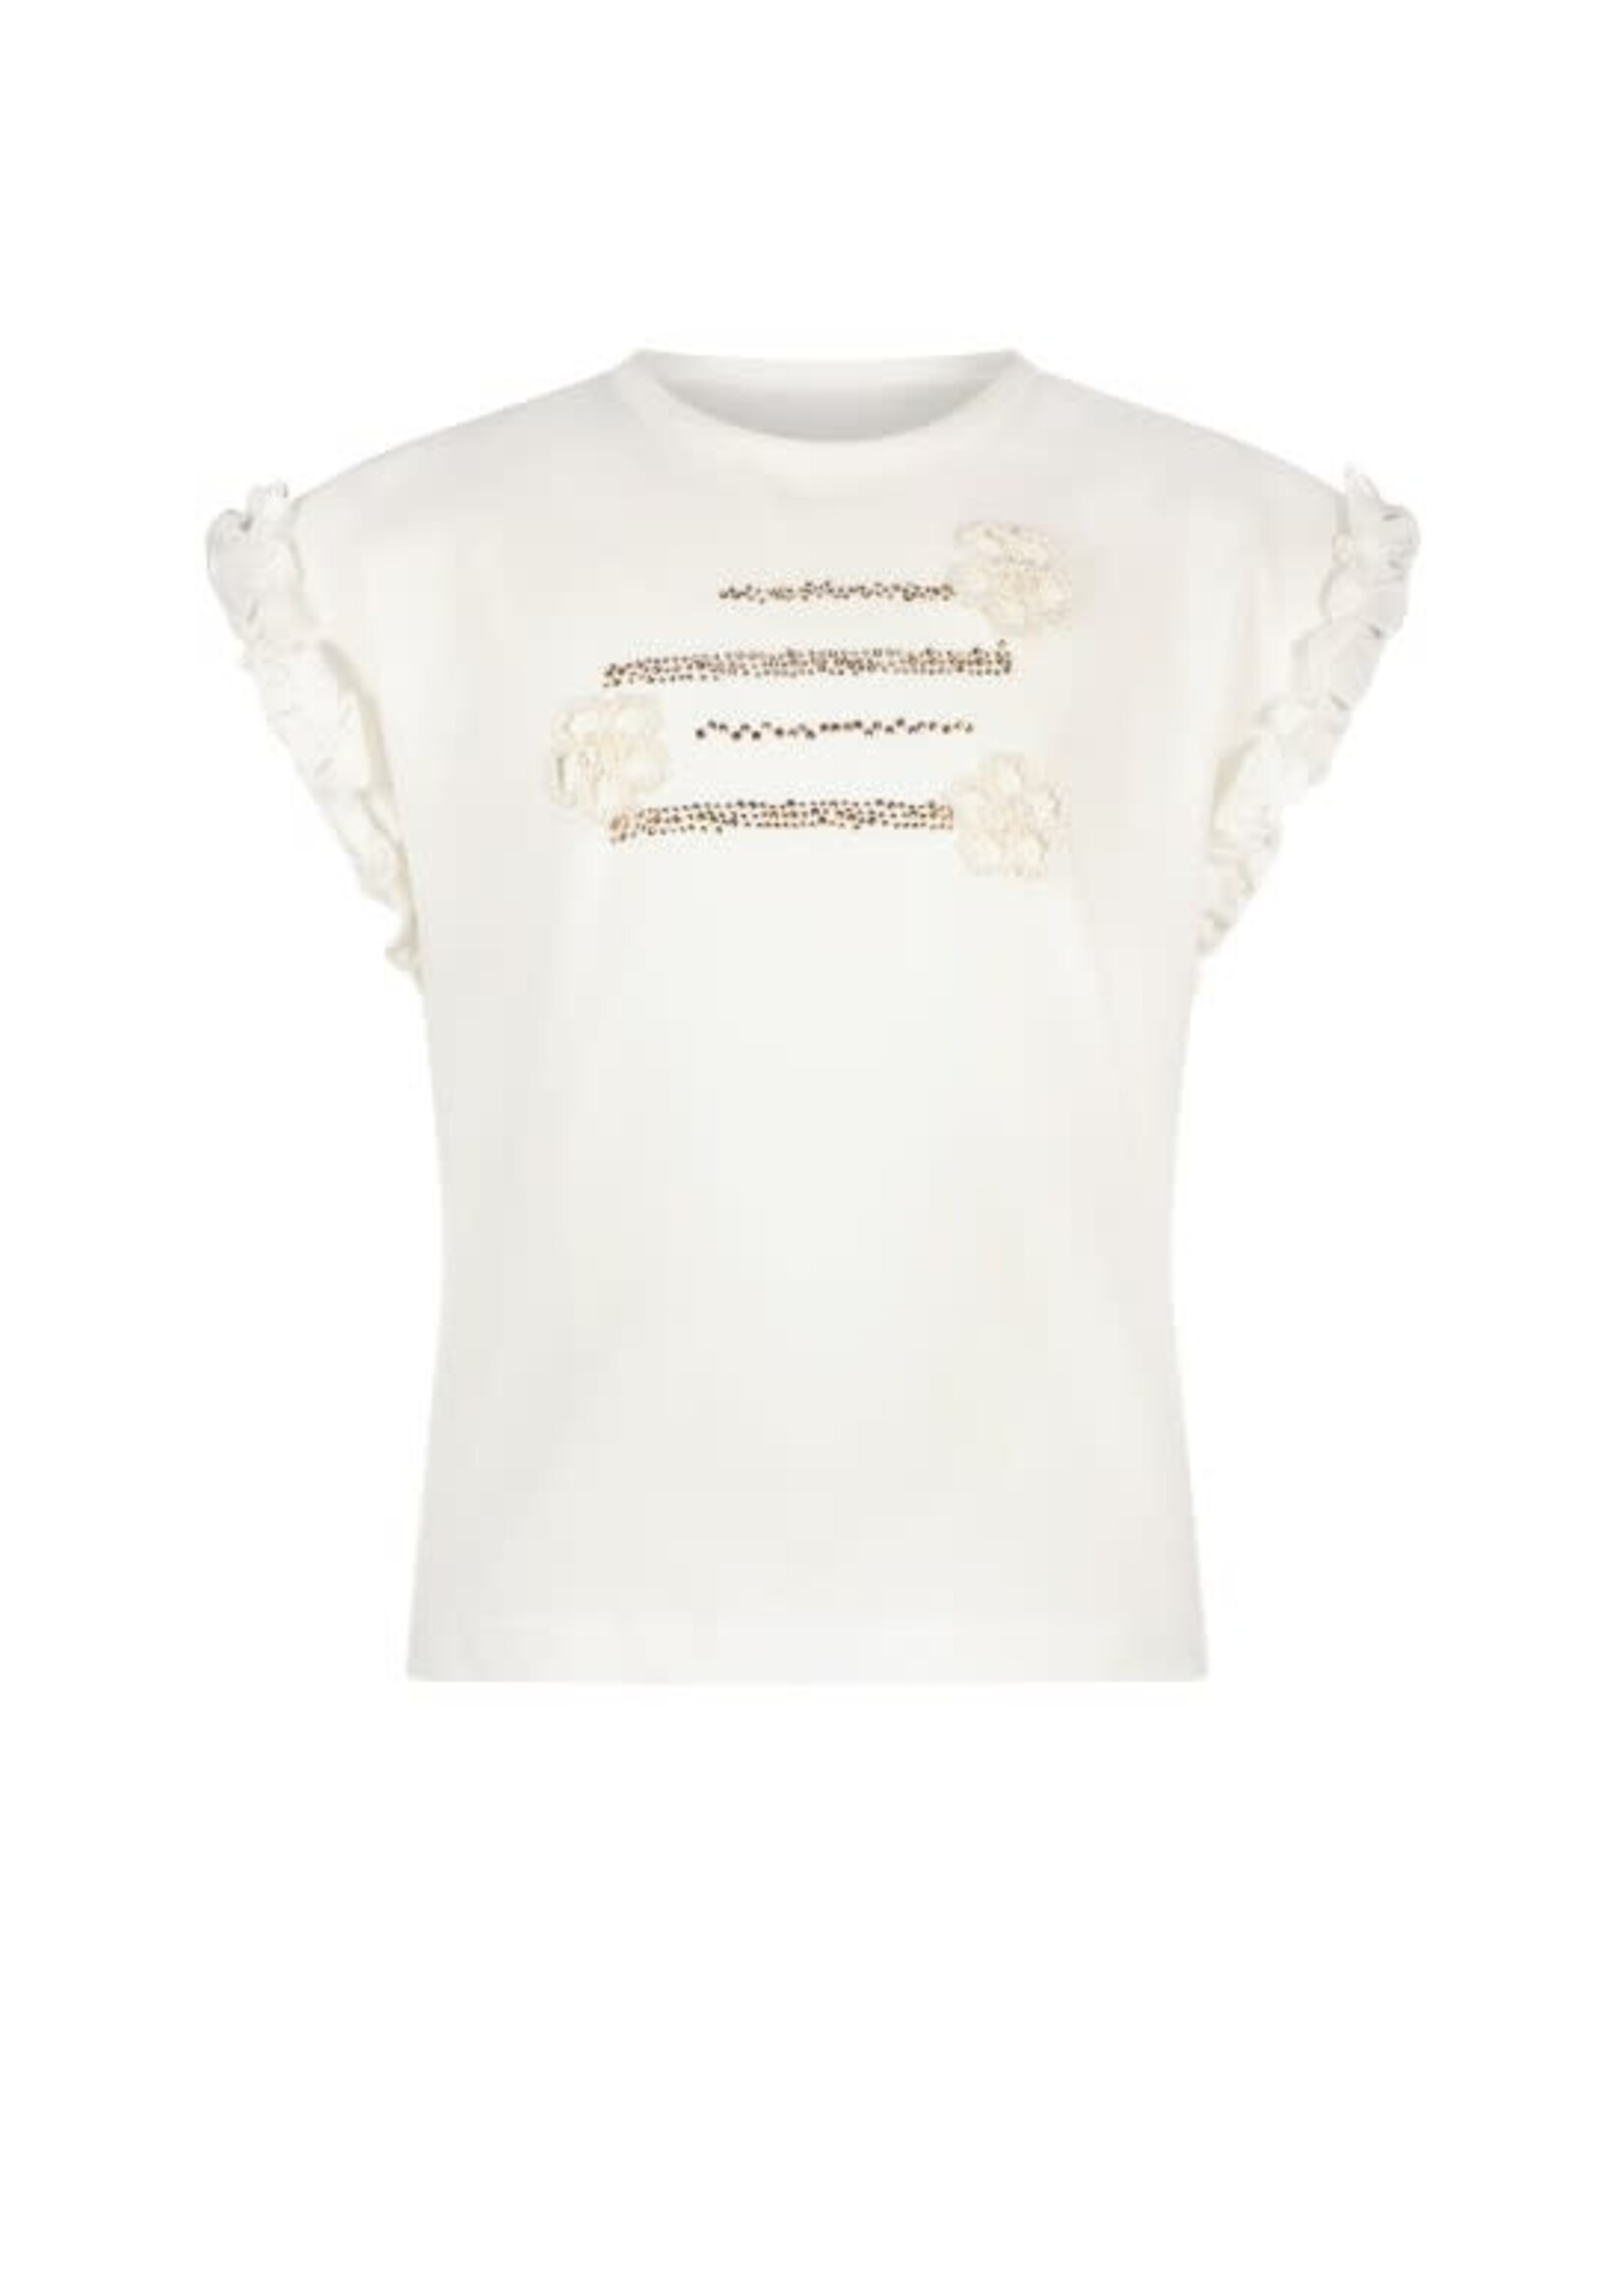 Le Chic Le Chic NOPALY flowers & lines T-shirt C312-5404 Off White